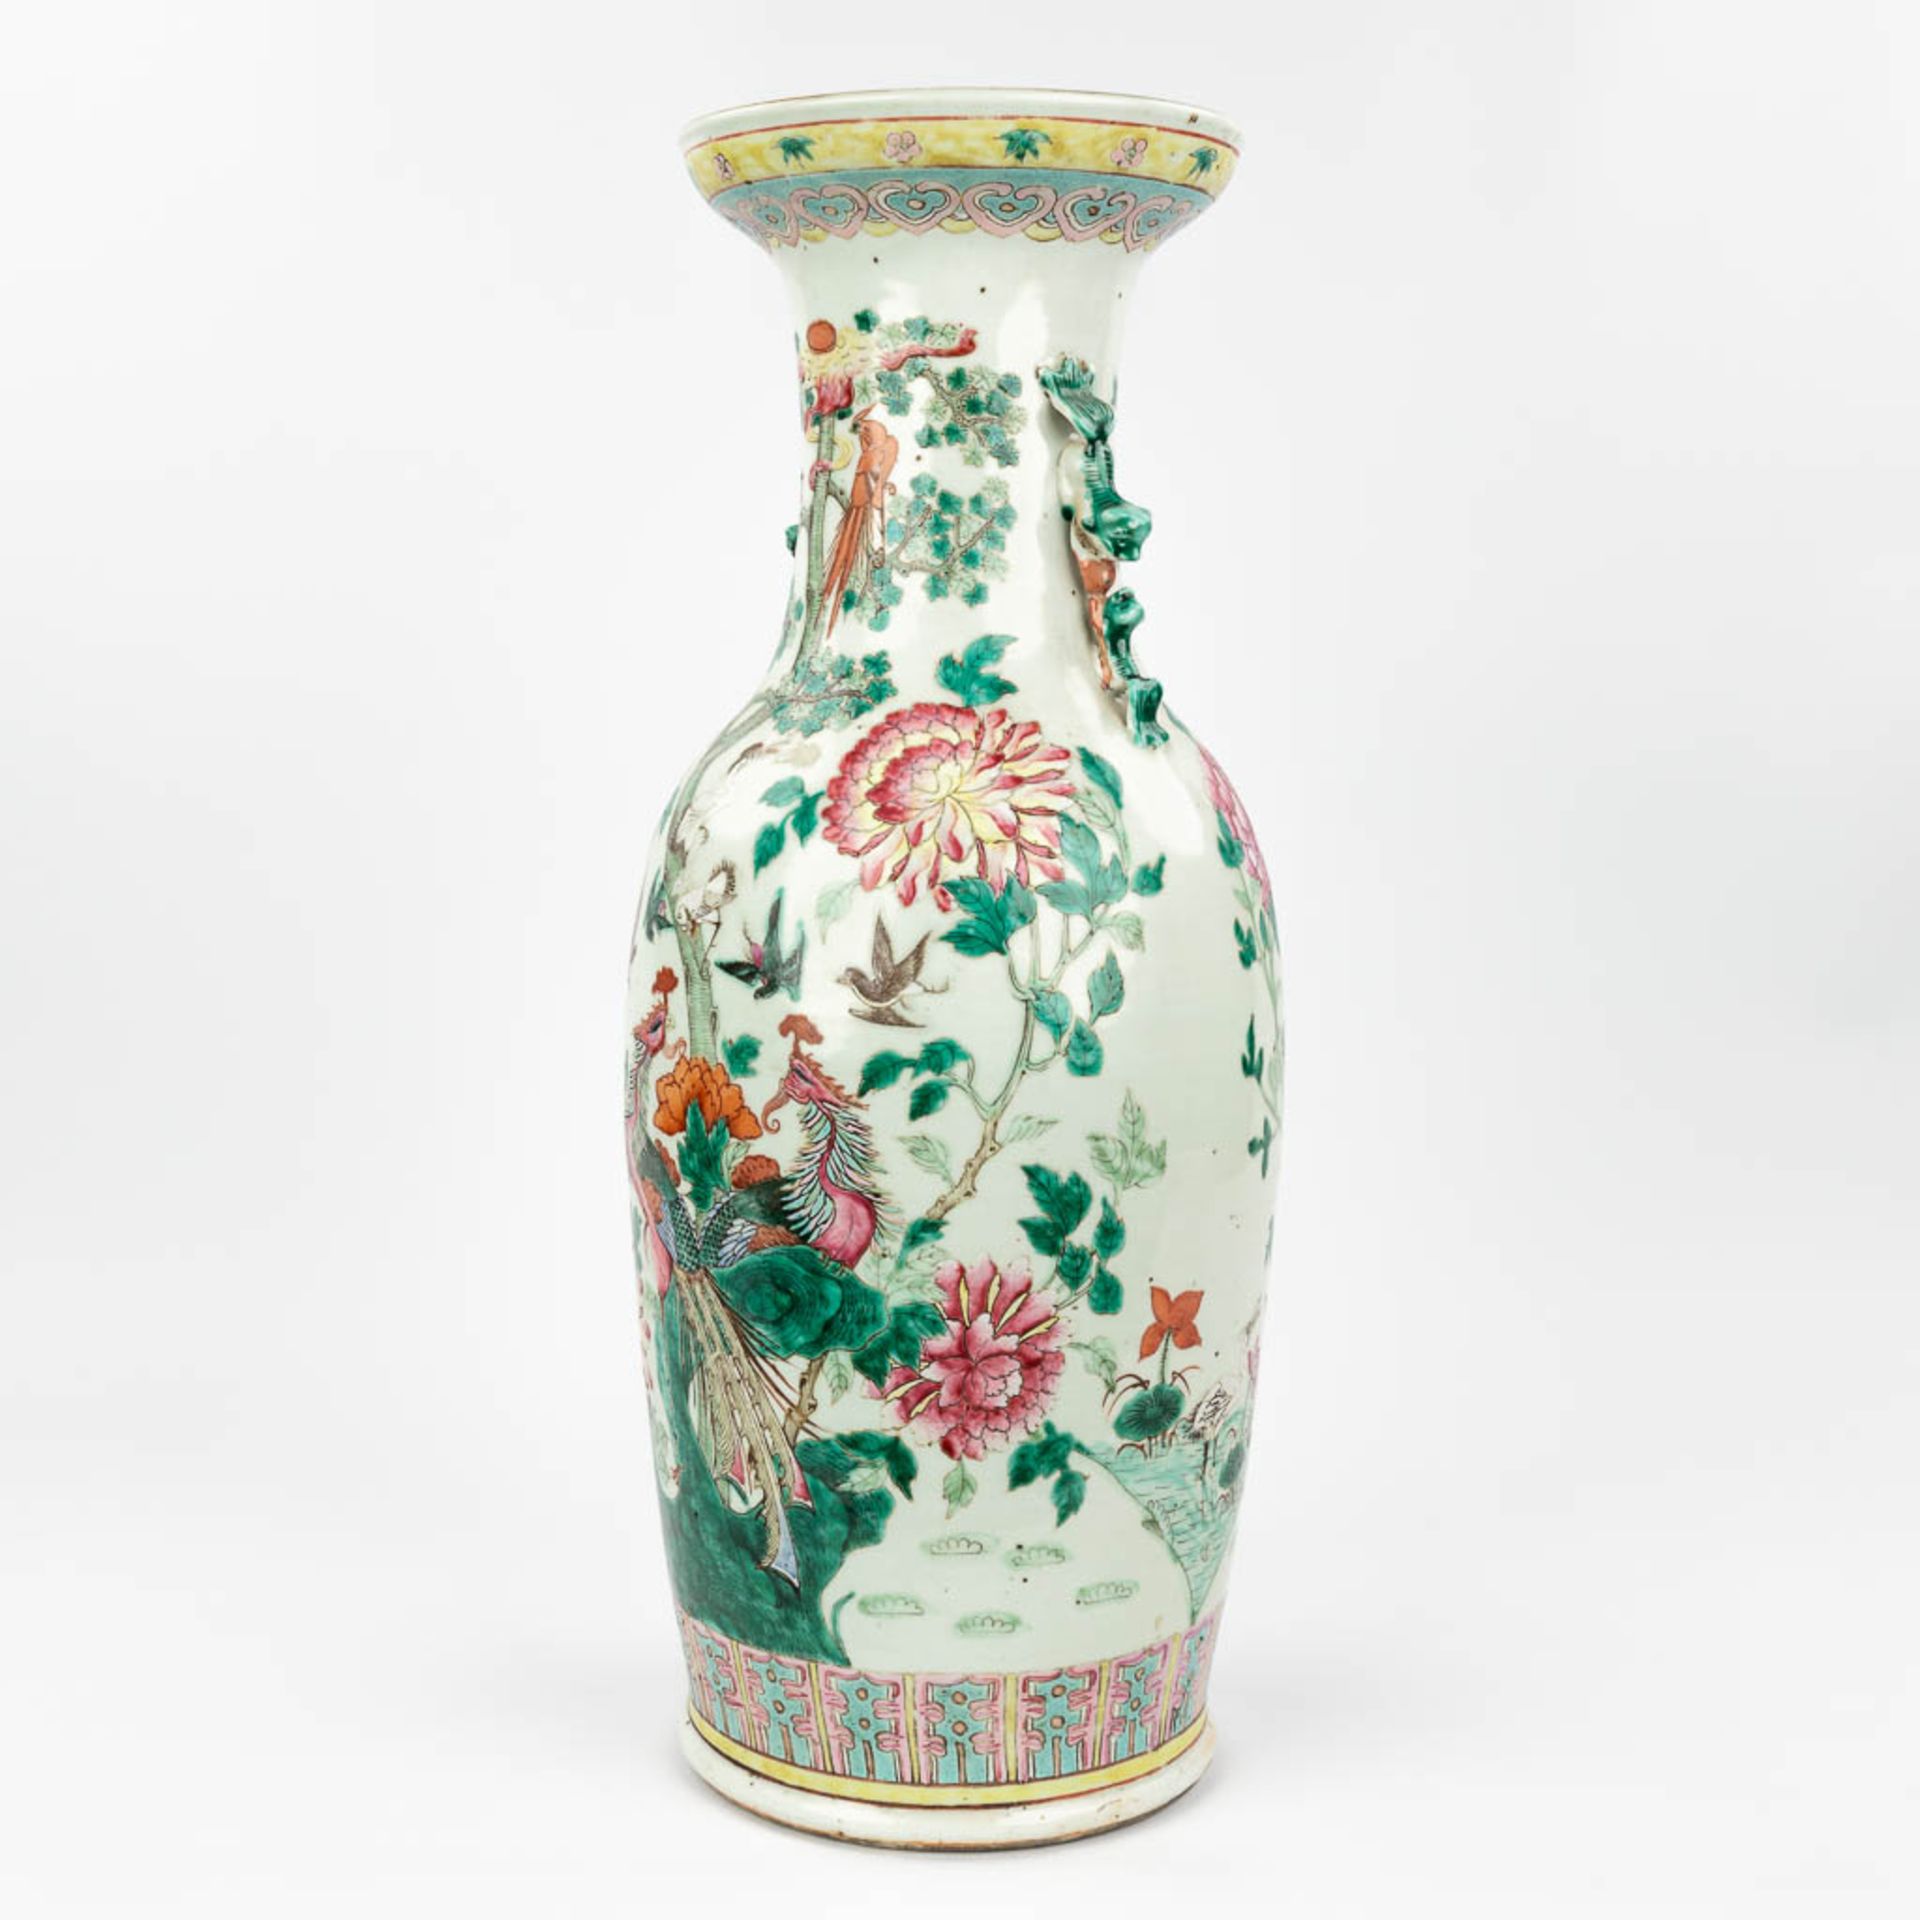 A Chinese vase made of porcelain, decorated with peacocks and birds. (61,5 x 24 cm) - Image 8 of 18